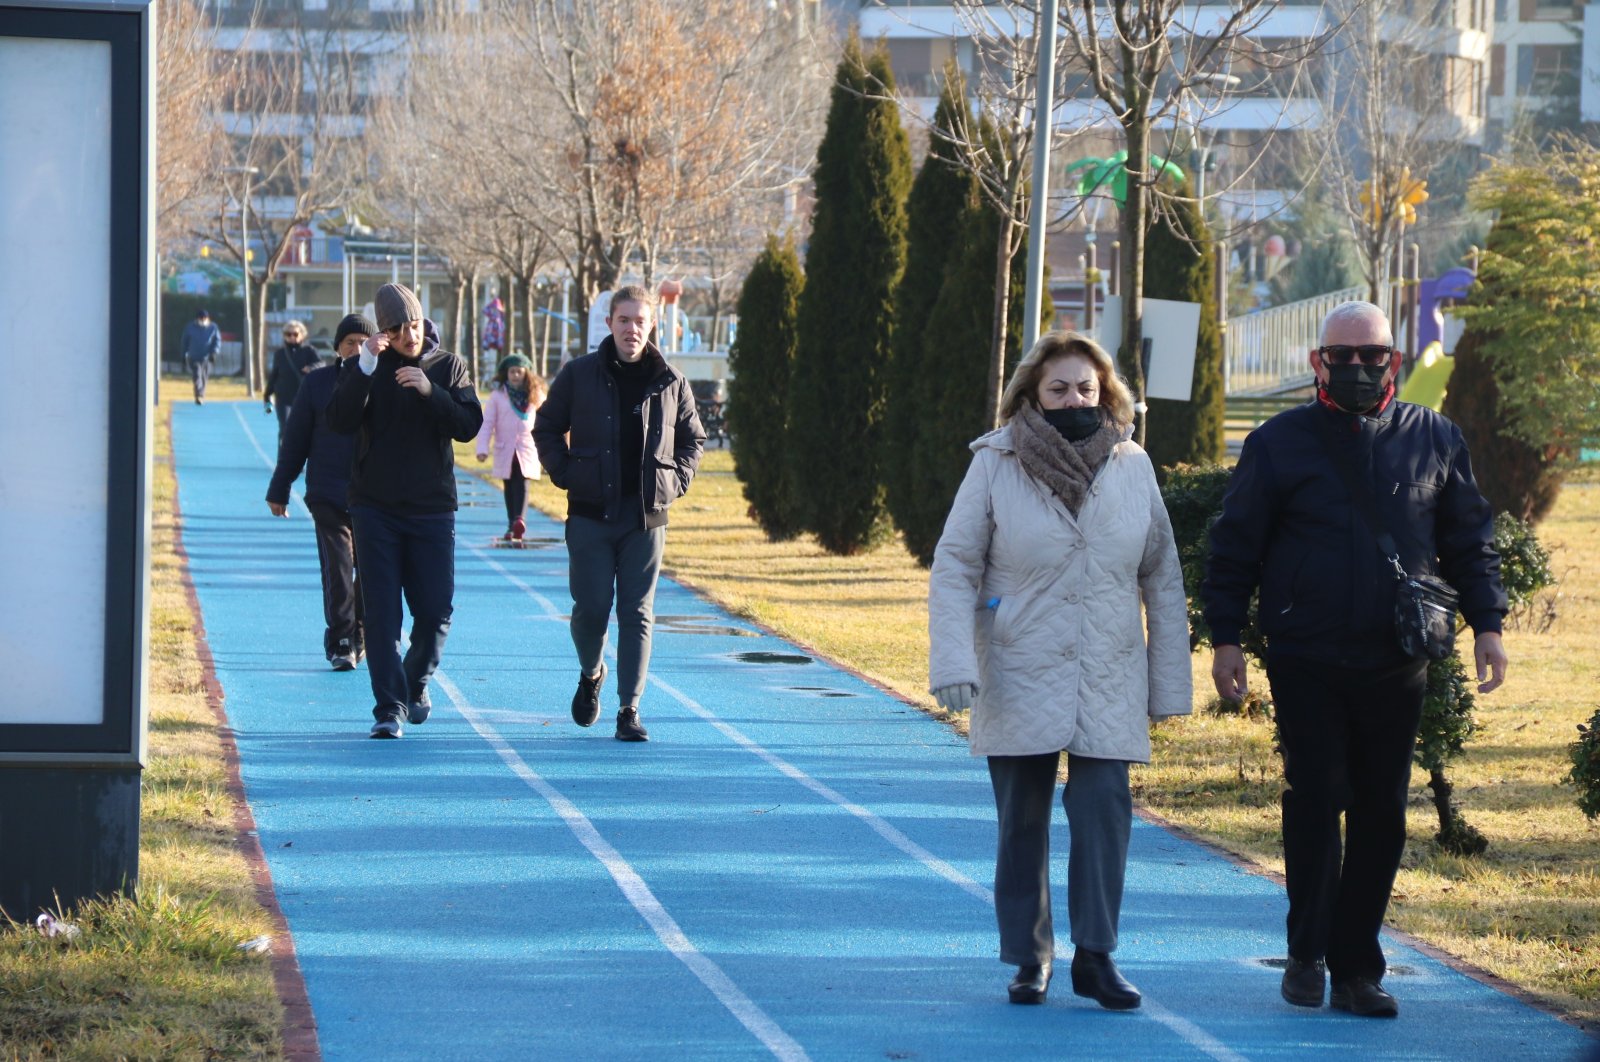 People with and without protective masks against COVID-19 walk in a park in Eskişehir, central Turkey, Jan. 9, 2022. (IHA Photo)